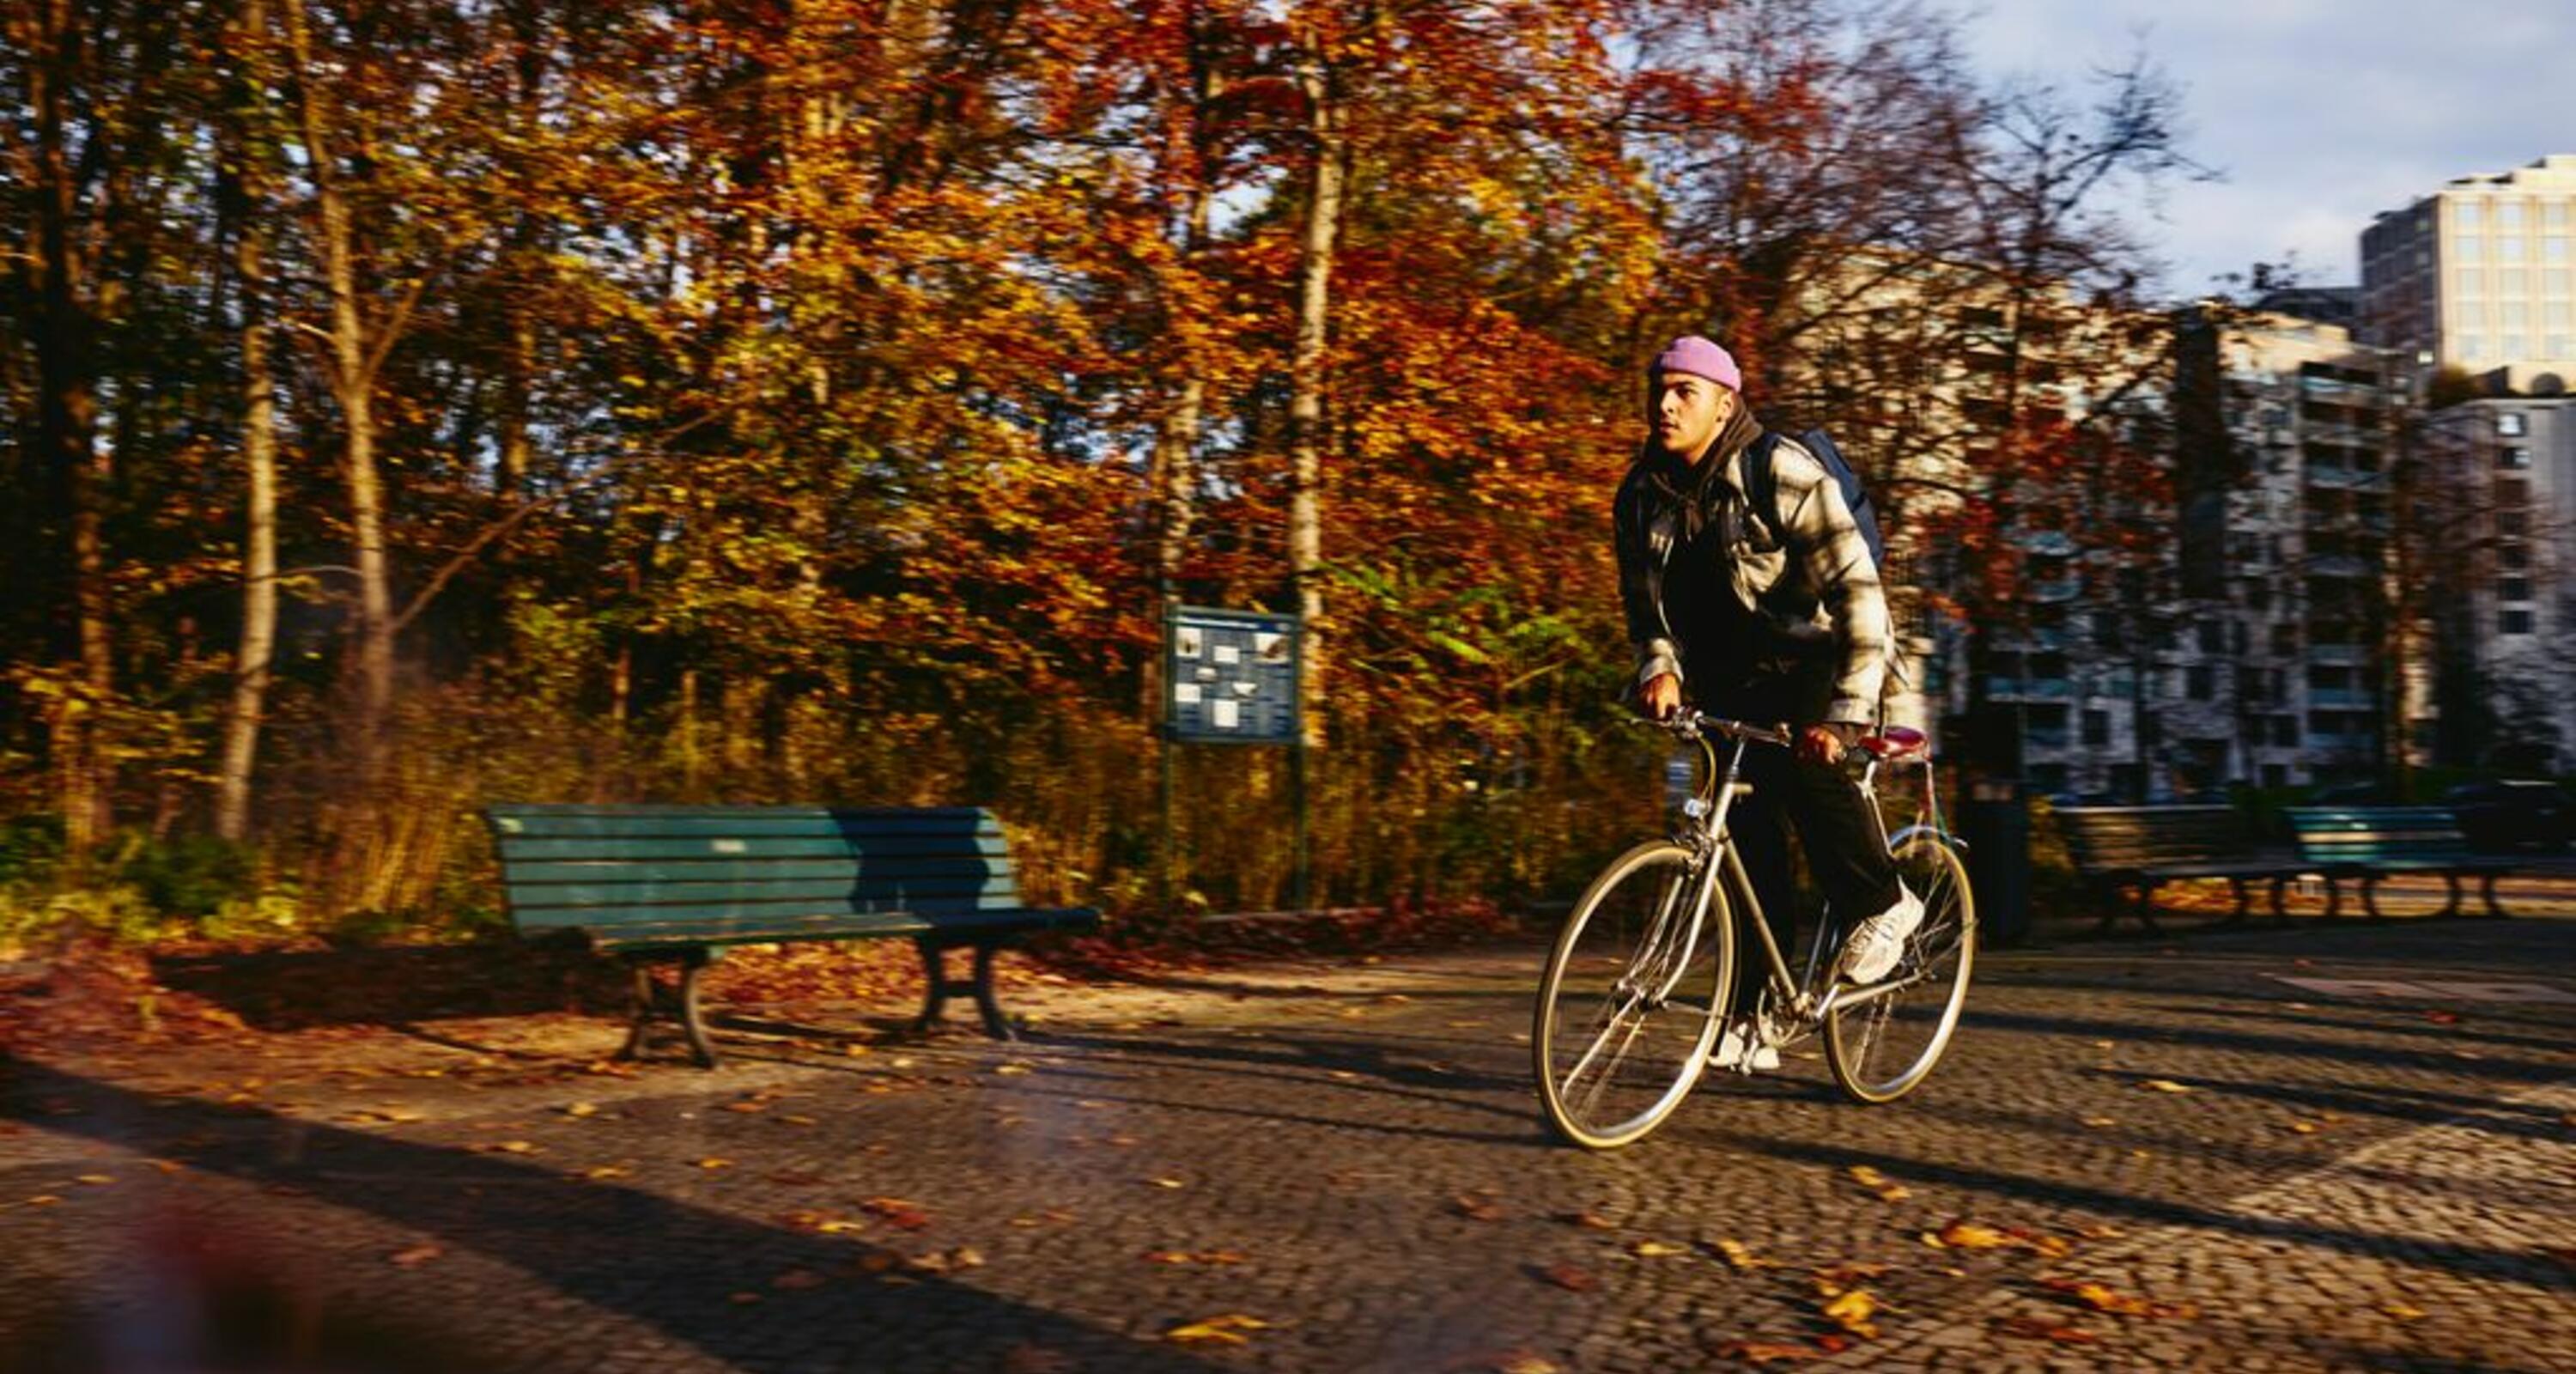 Cycling man, autumn trees and office buildings on the background.